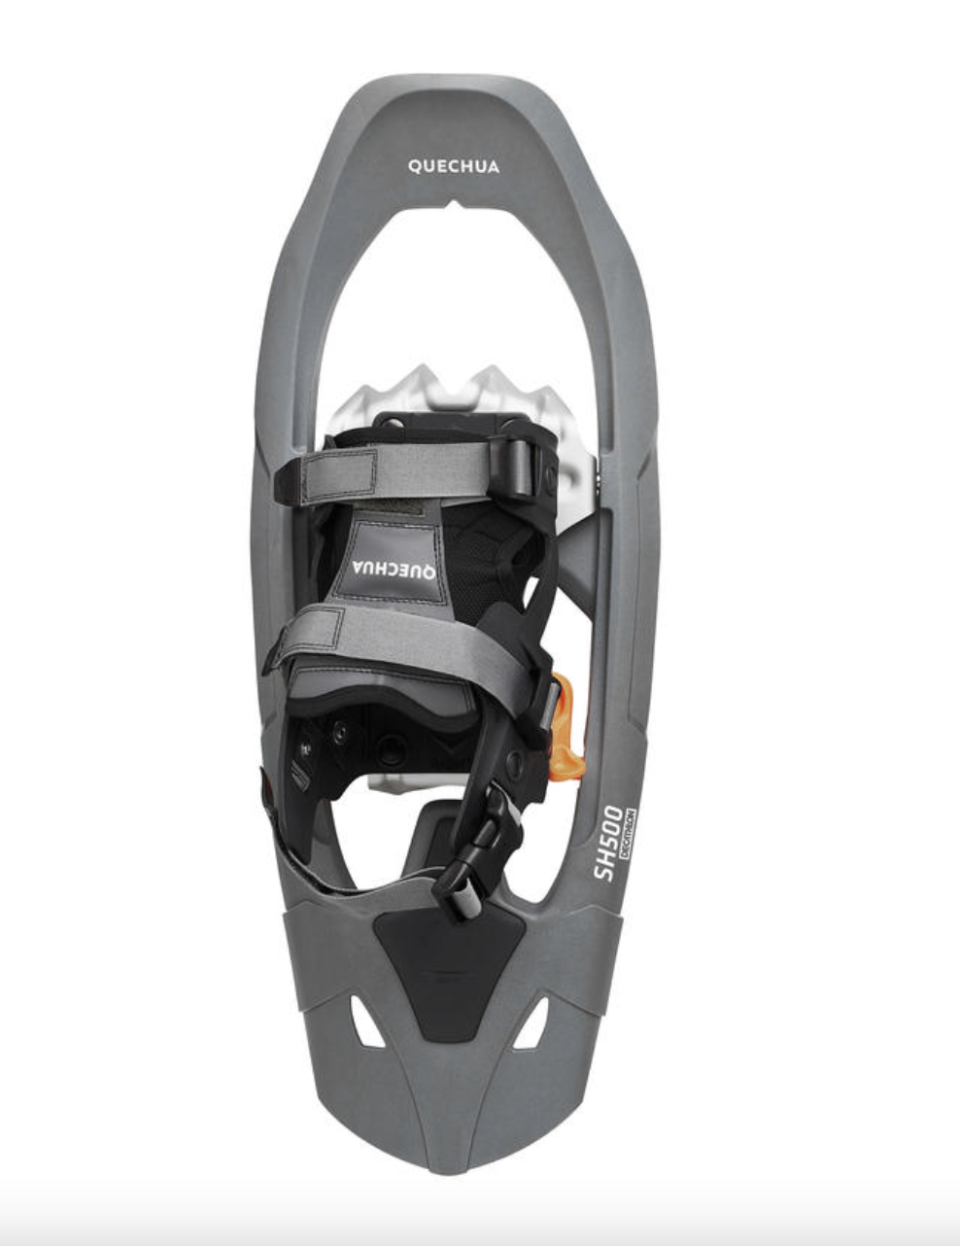 Quechua Adult Snowshoes in grey with black straps (Photo via Decathlon)